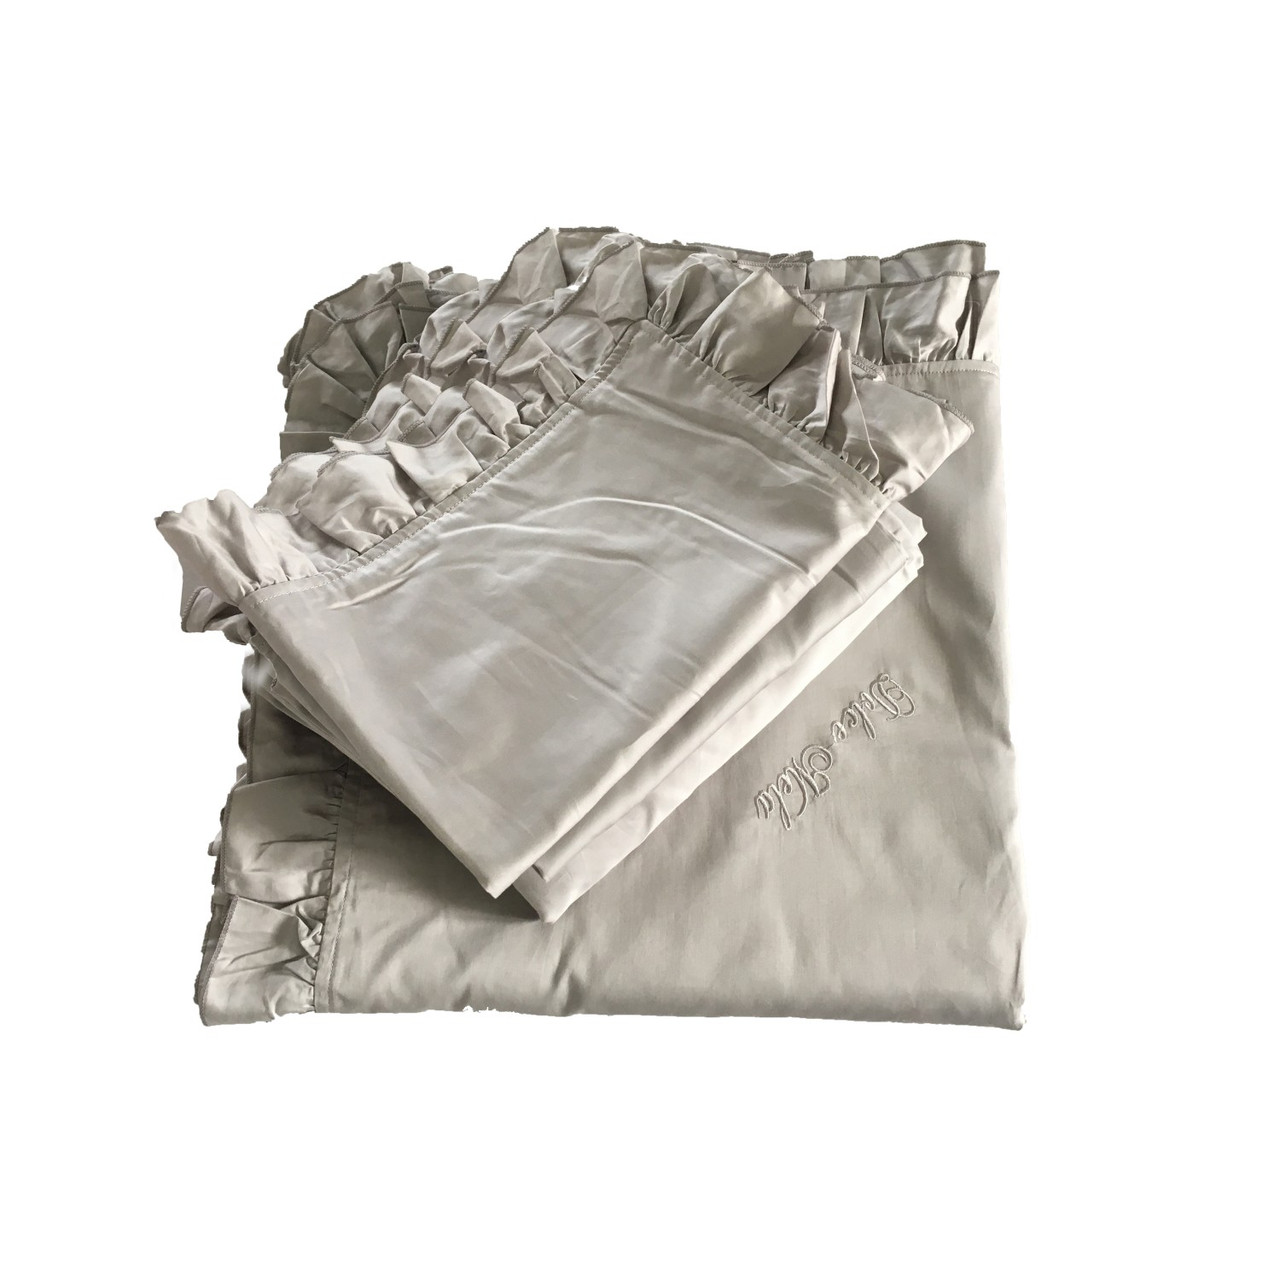 DM809T Bed-in-bag Ruffle Bedding by Dolce Mela